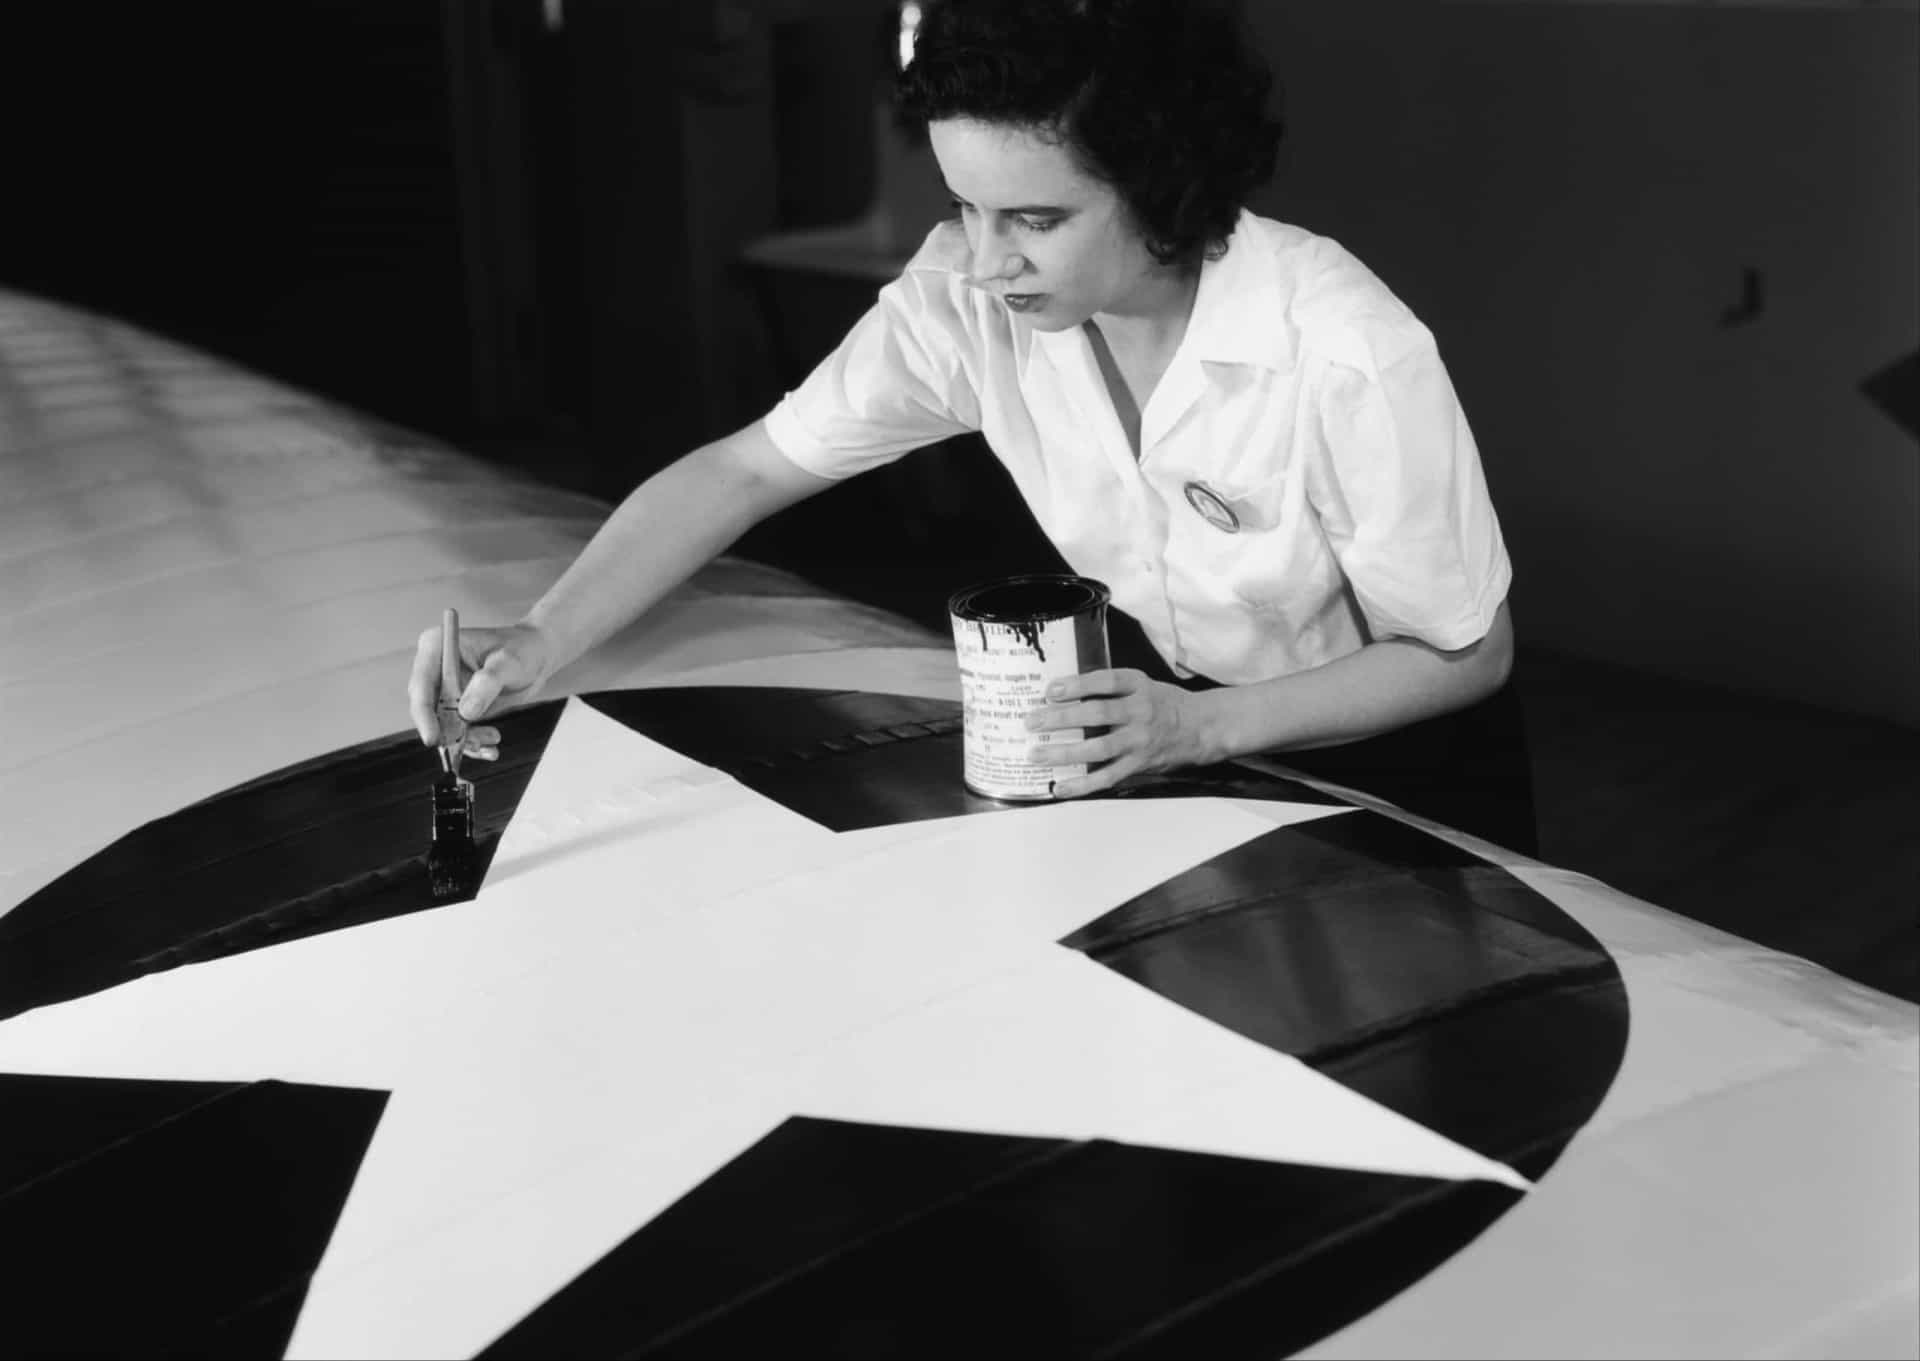 <p>A female civil service worker at the Corpus Christi Naval Air Base in Texas puts the finishing touches to American insignia on the wing of a repaired US Navy aircraft.</p><p>You may also like:<a href="https://www.starsinsider.com/n/243737?utm_source=msn.com&utm_medium=display&utm_campaign=referral_description&utm_content=517253en-us"> This is where you should live in the USA based on your personality</a></p>